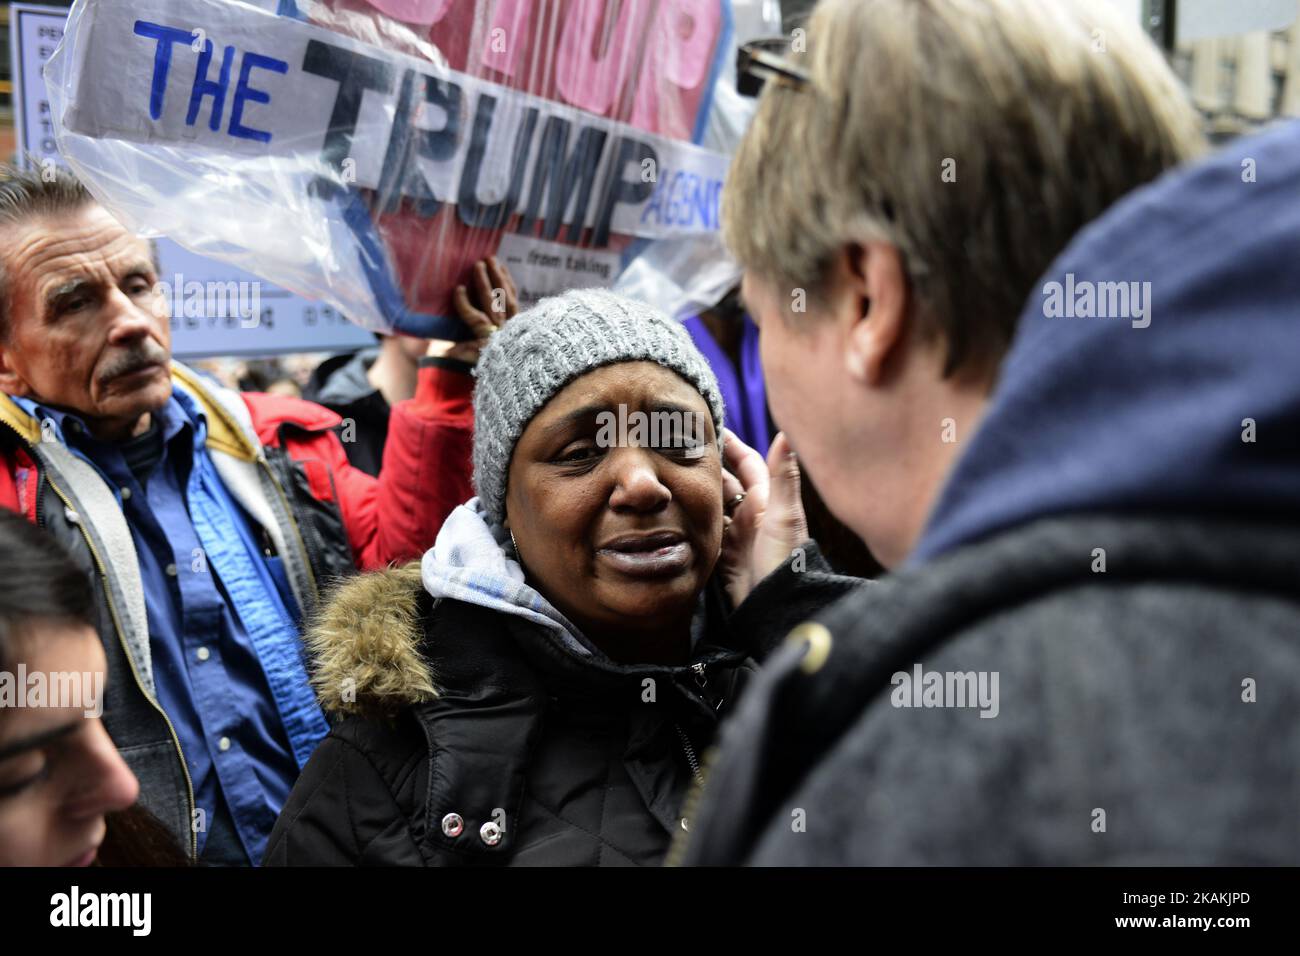 Pat Kelley, of Lancaster County, PA (foreground), interacts Myra Young, of Germantown, Philadelphia, PA (center) after Young shared her life story with hundreds gathered in protest outside the Center City, Philadelphia, PA office of Senator Pat Toomey (R-PA), on February 7th, 2017. Moments earlier Sen. Toomey cast a controversial and widely protested vote in favor for Betsy DeVos to become the Secretary of Education in the Trump-Administration. (Photo by Bastiaan Slabbers/NurPhoto) *** Please Use Credit from Credit Field *** Stock Photo